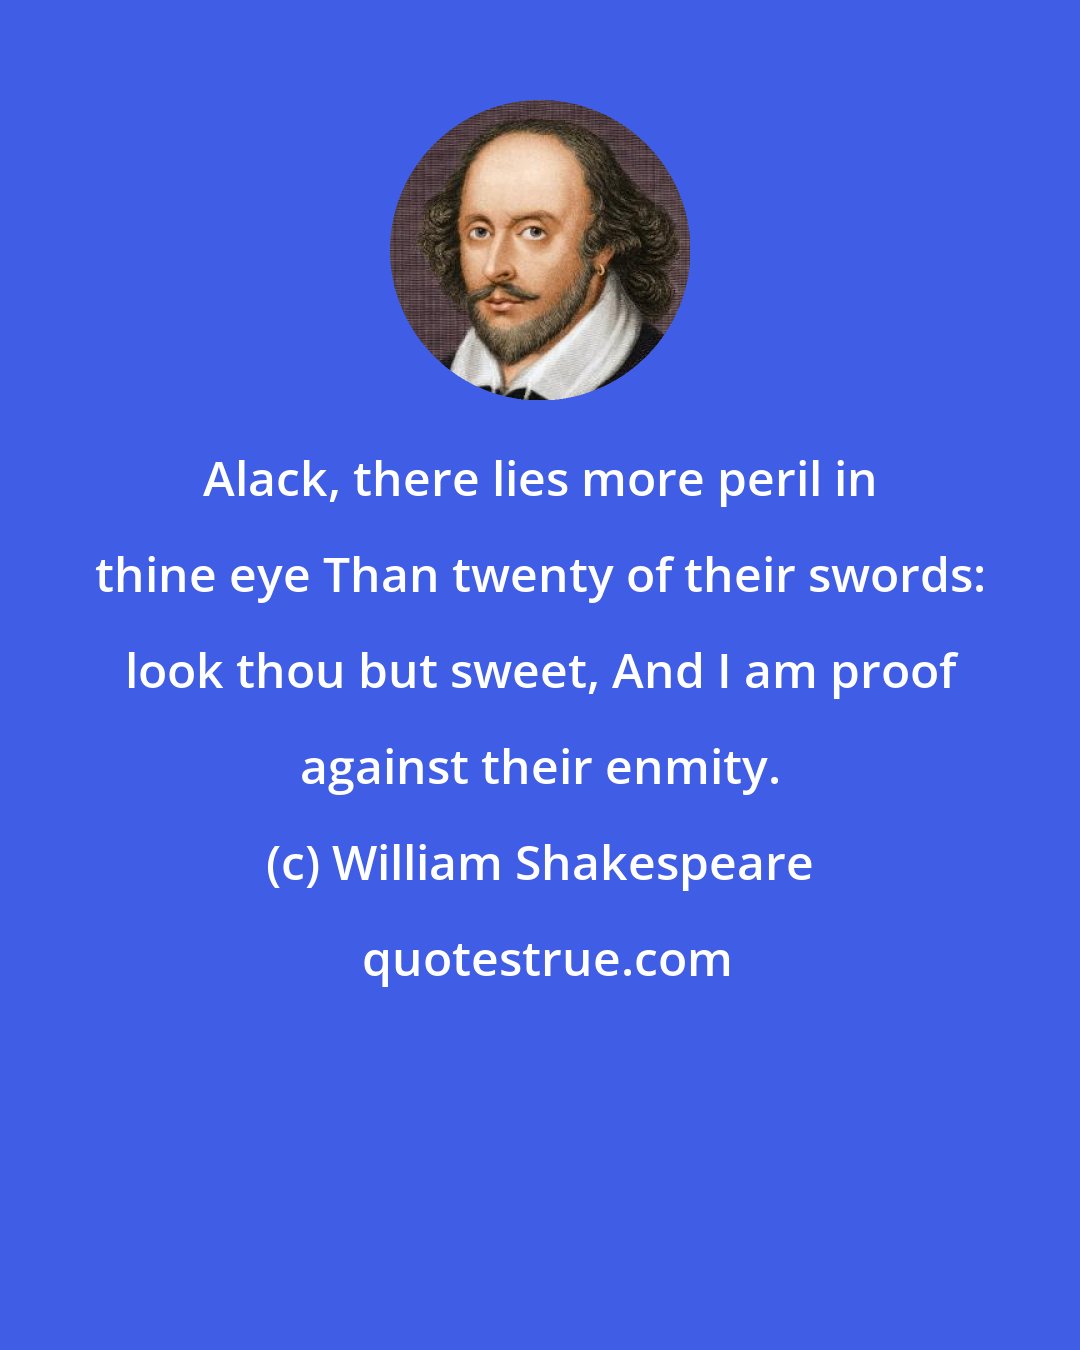 William Shakespeare: Alack, there lies more peril in thine eye Than twenty of their swords: look thou but sweet, And I am proof against their enmity.